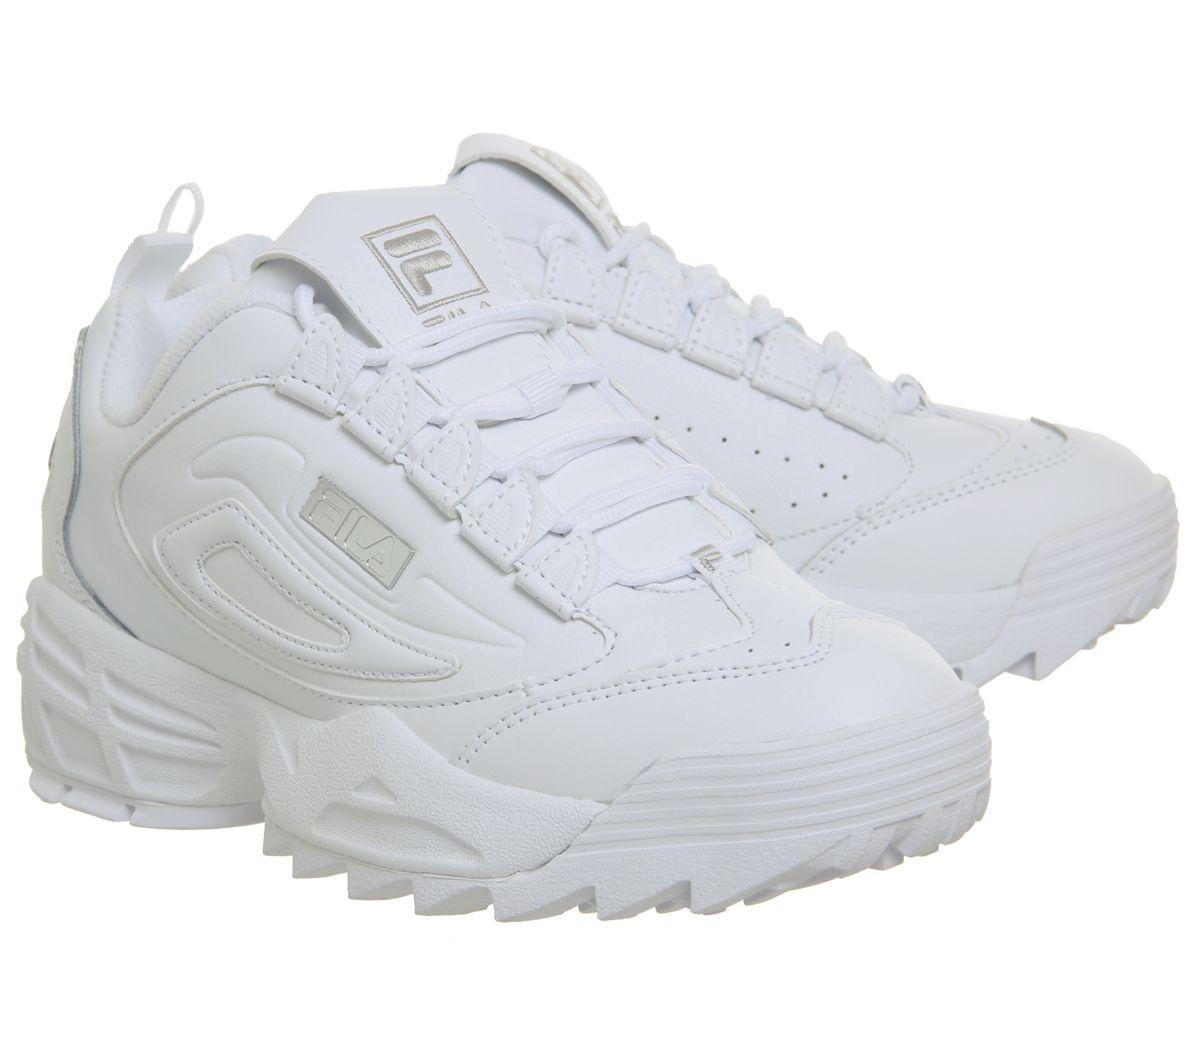 Fila Leather Disruptor 3 Trainers in 